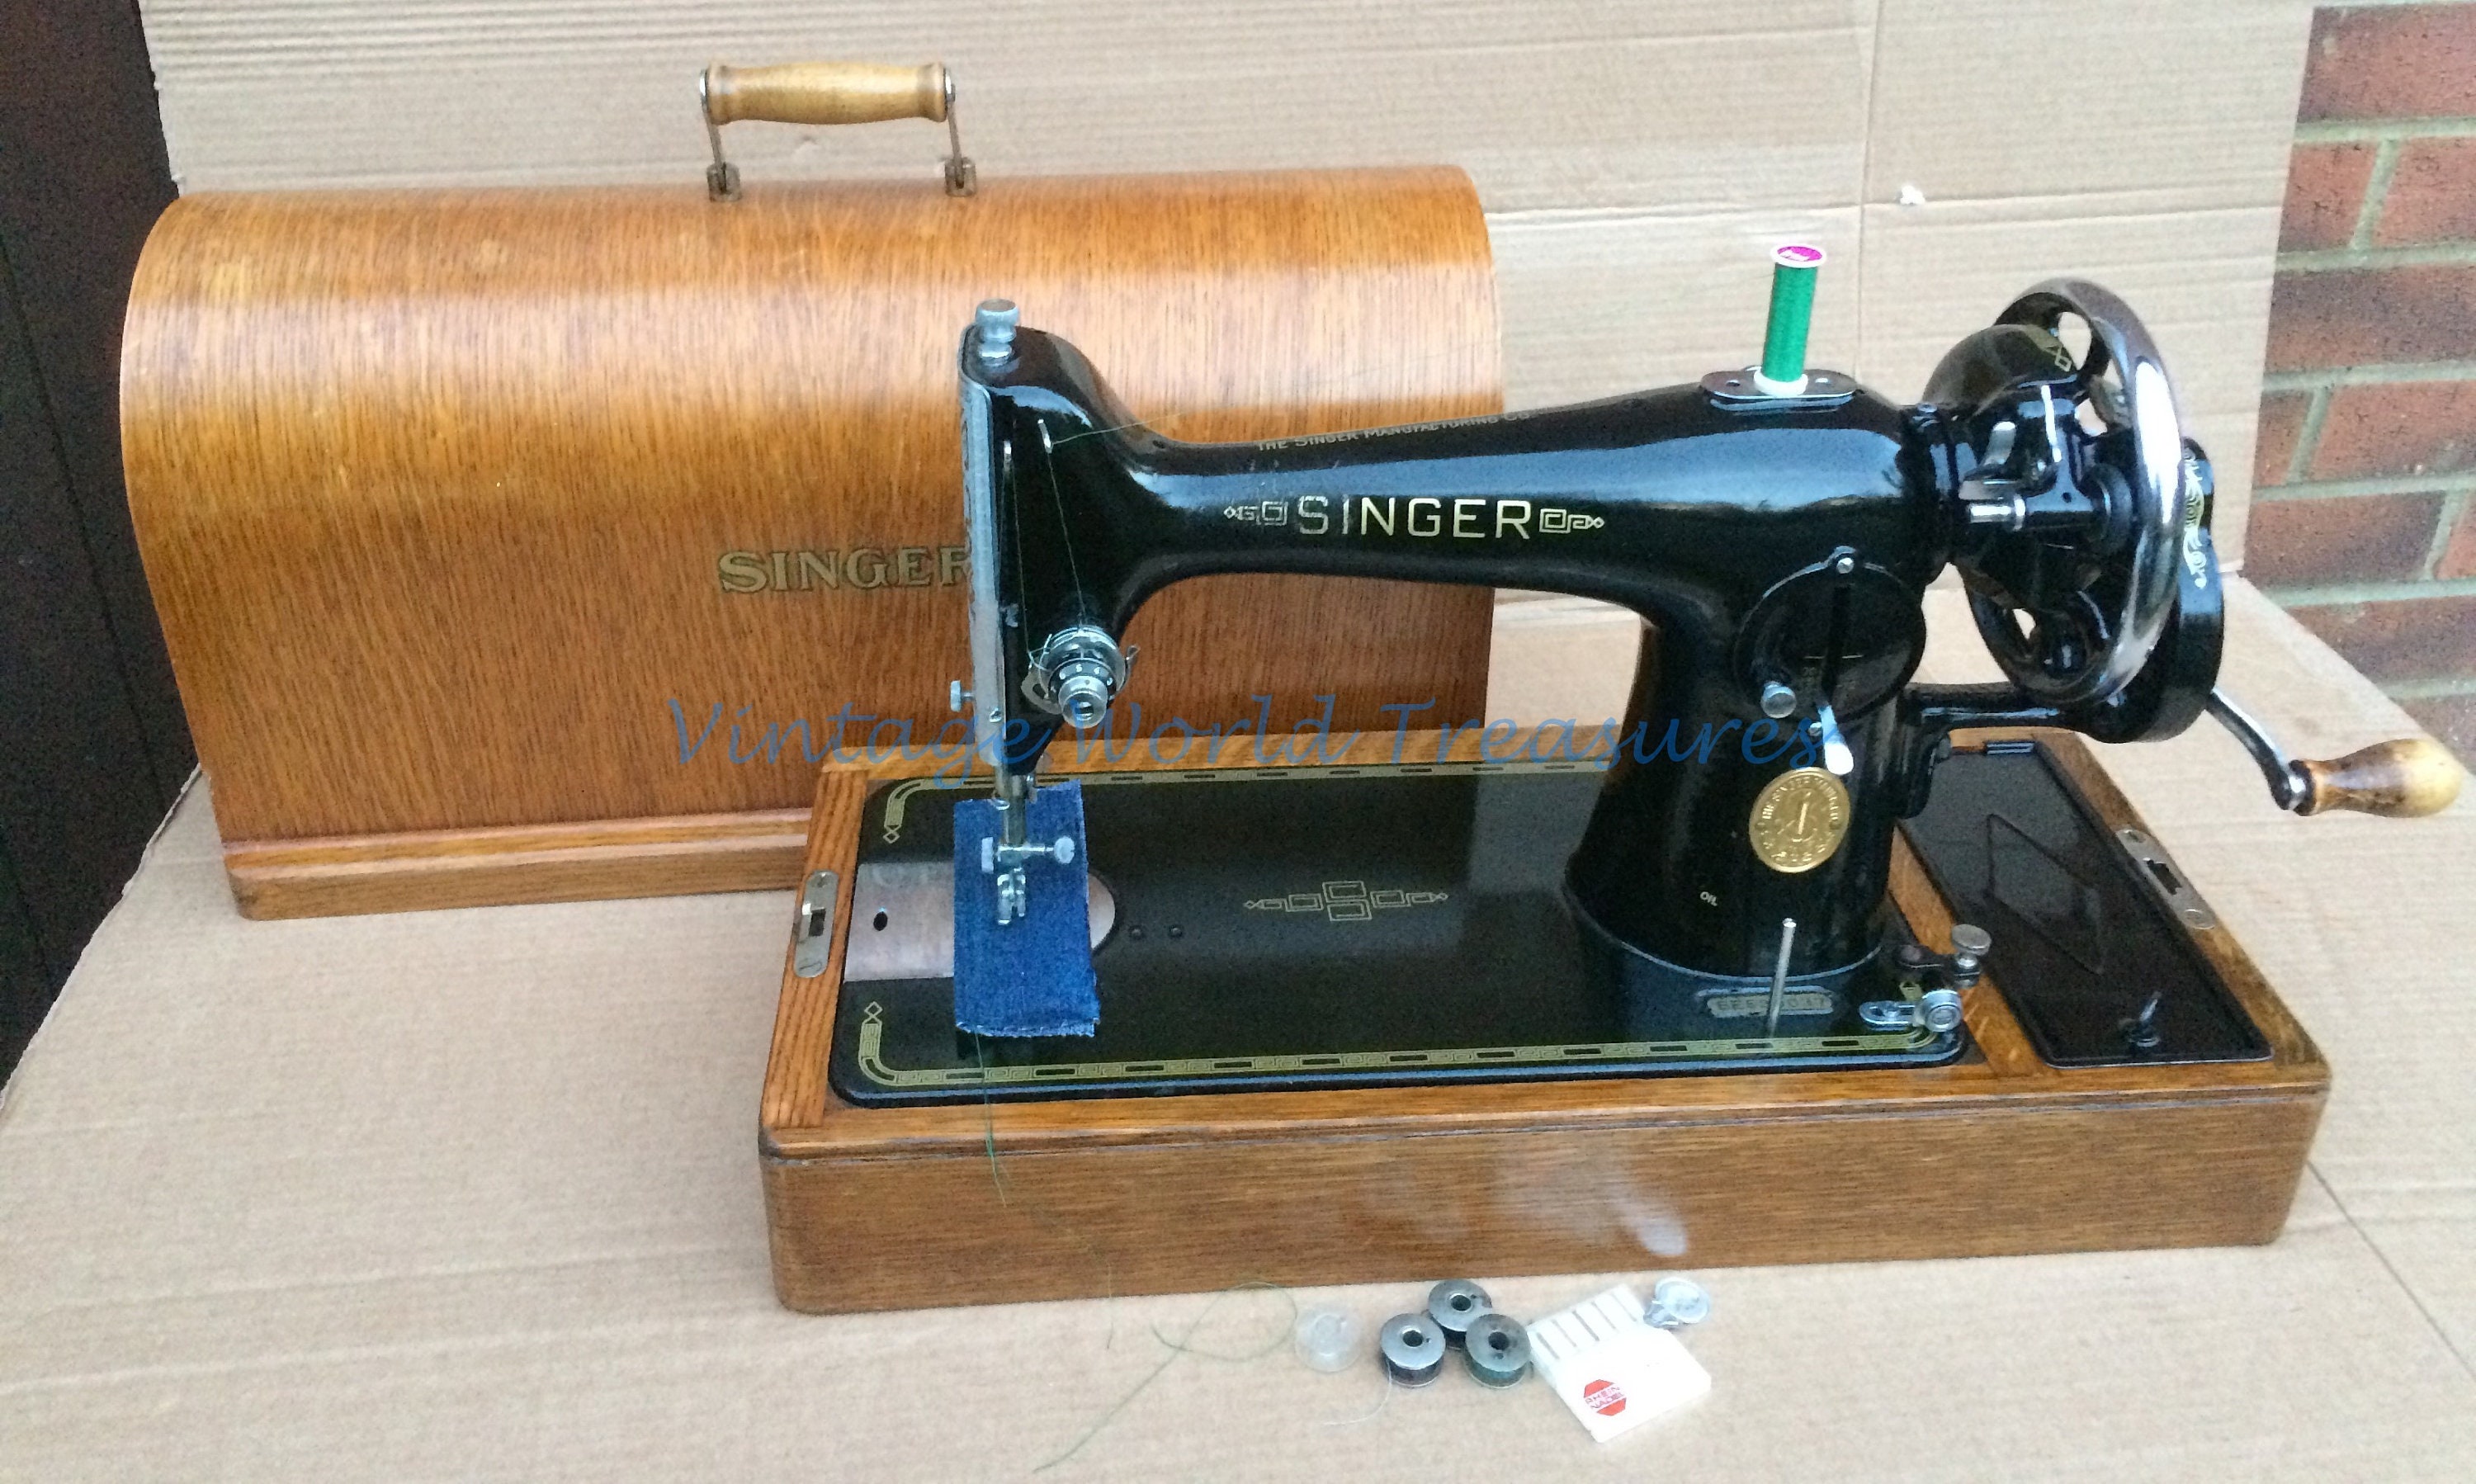 Singer Sewhandy Toy Sewing Machine Needles, Copy of Instructions and Spool  Felts for Singer 20-10 Rectangular Base-no MACHINE INCLUDED 